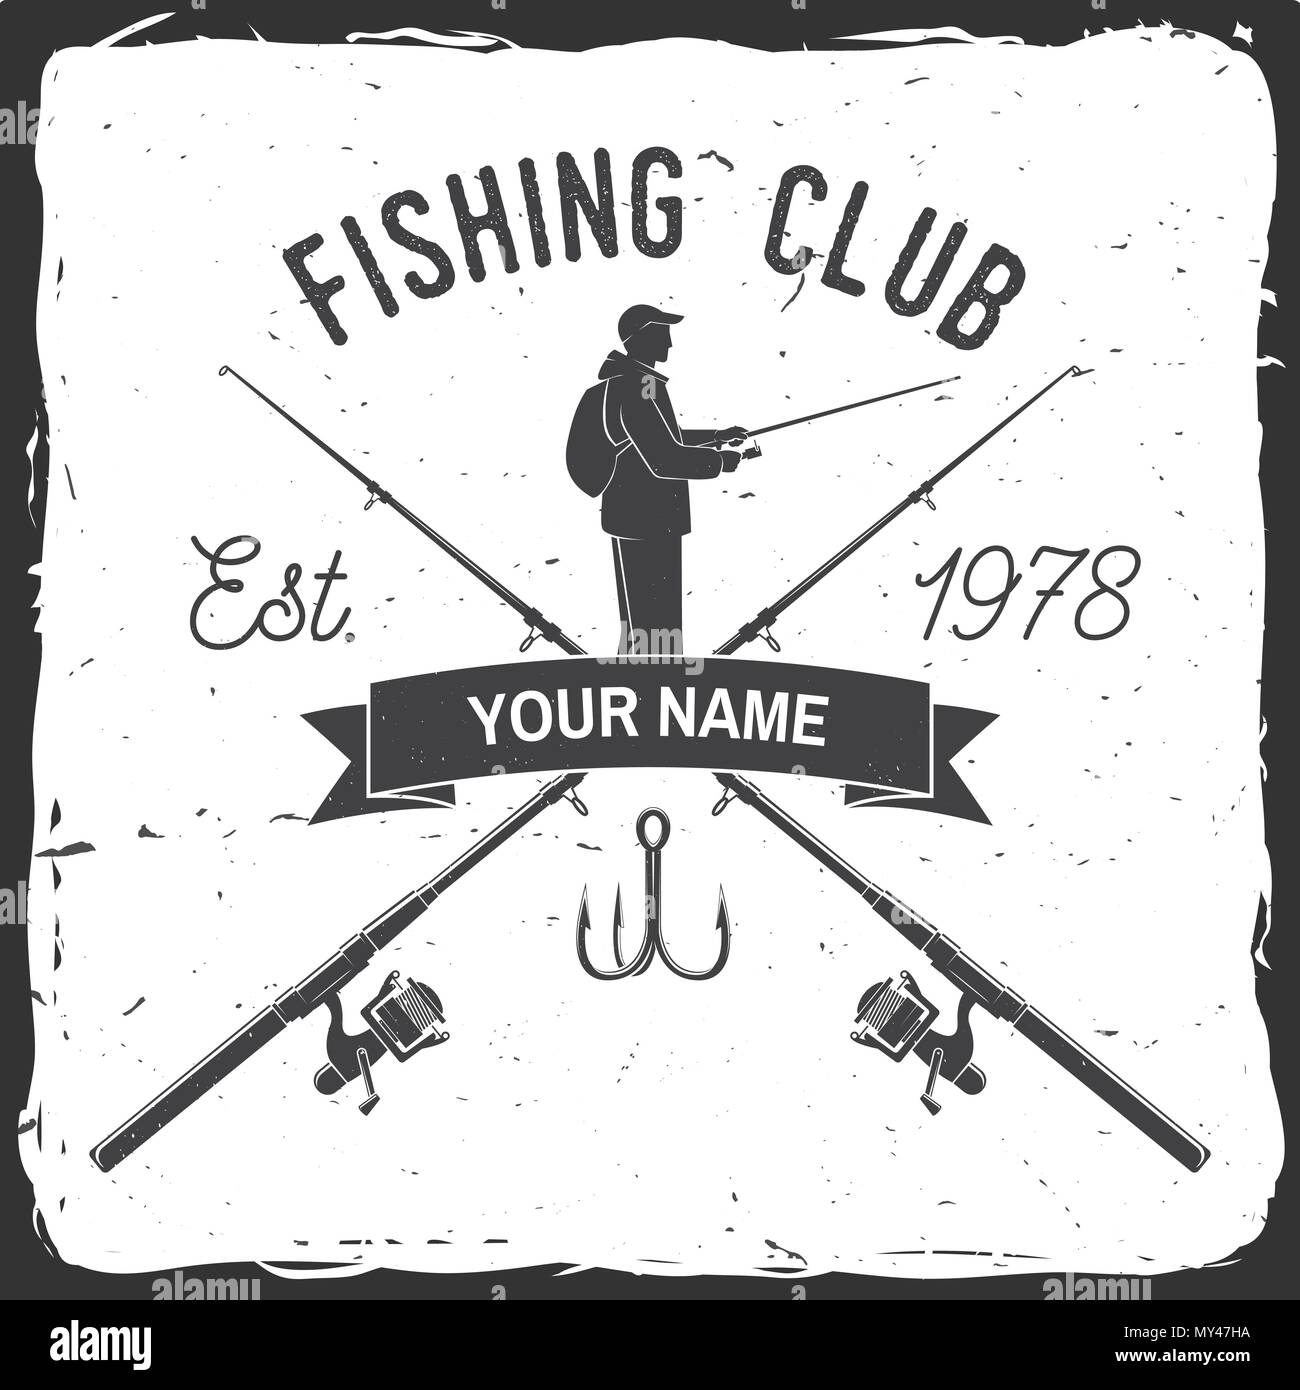 Fishing club. Vector illustration. Concept for shirt or logo